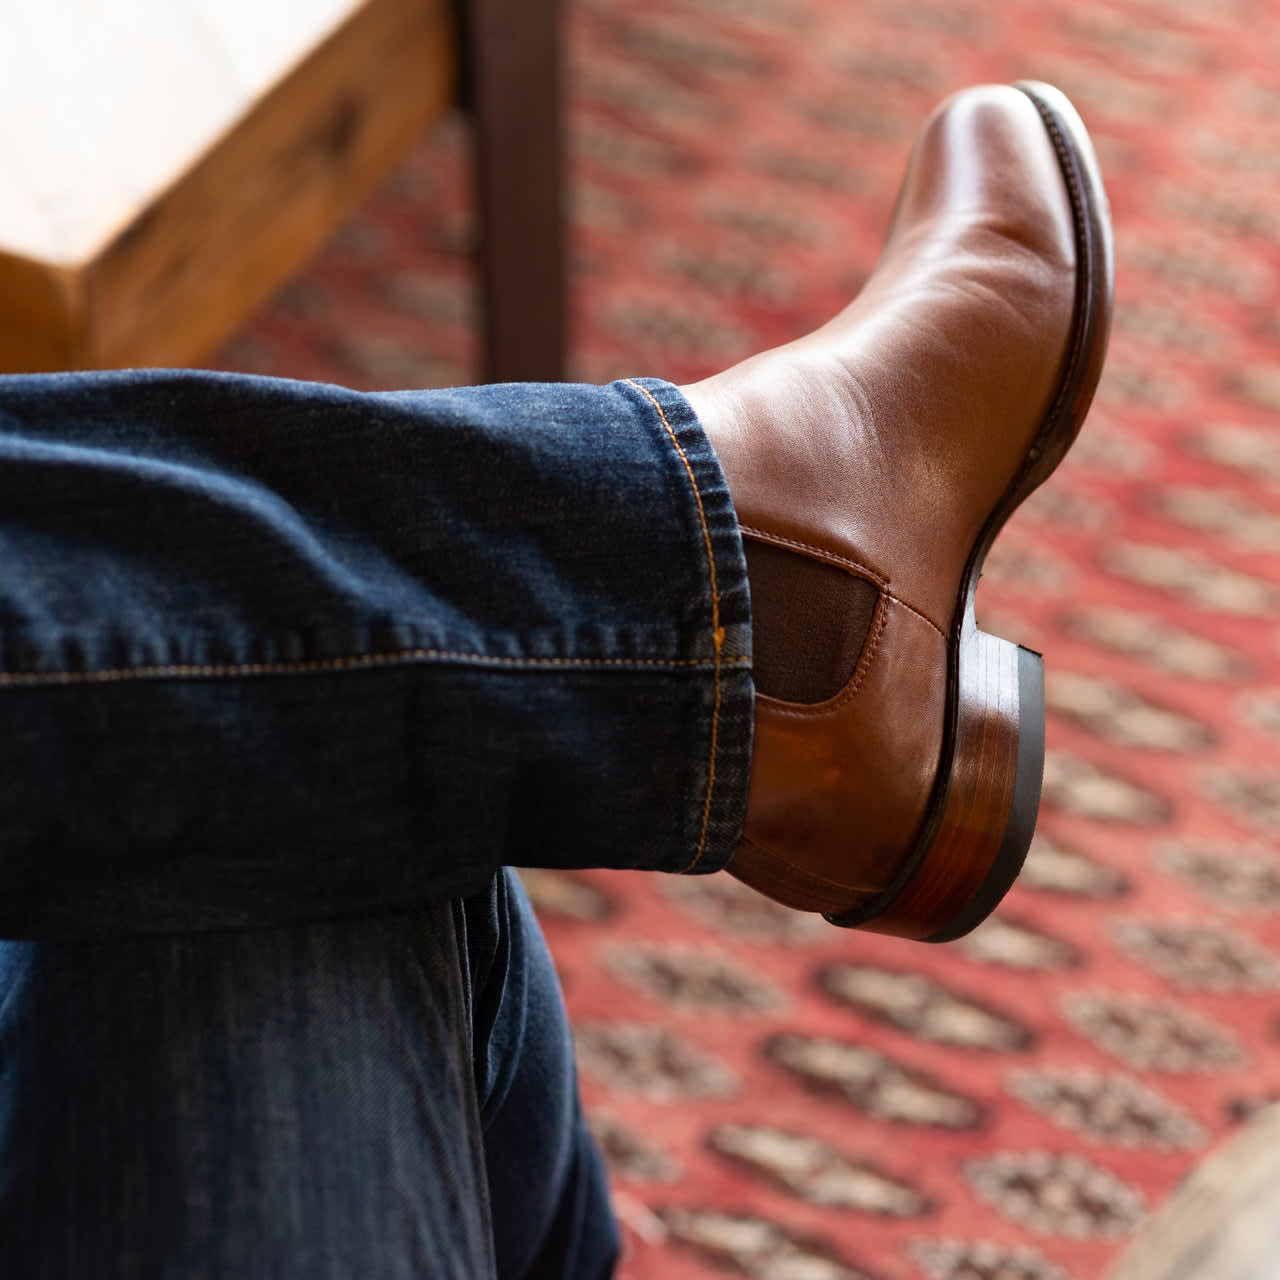 Men's Chelsea Boot - Handmade Calfskin and Suede Leather | The Chance